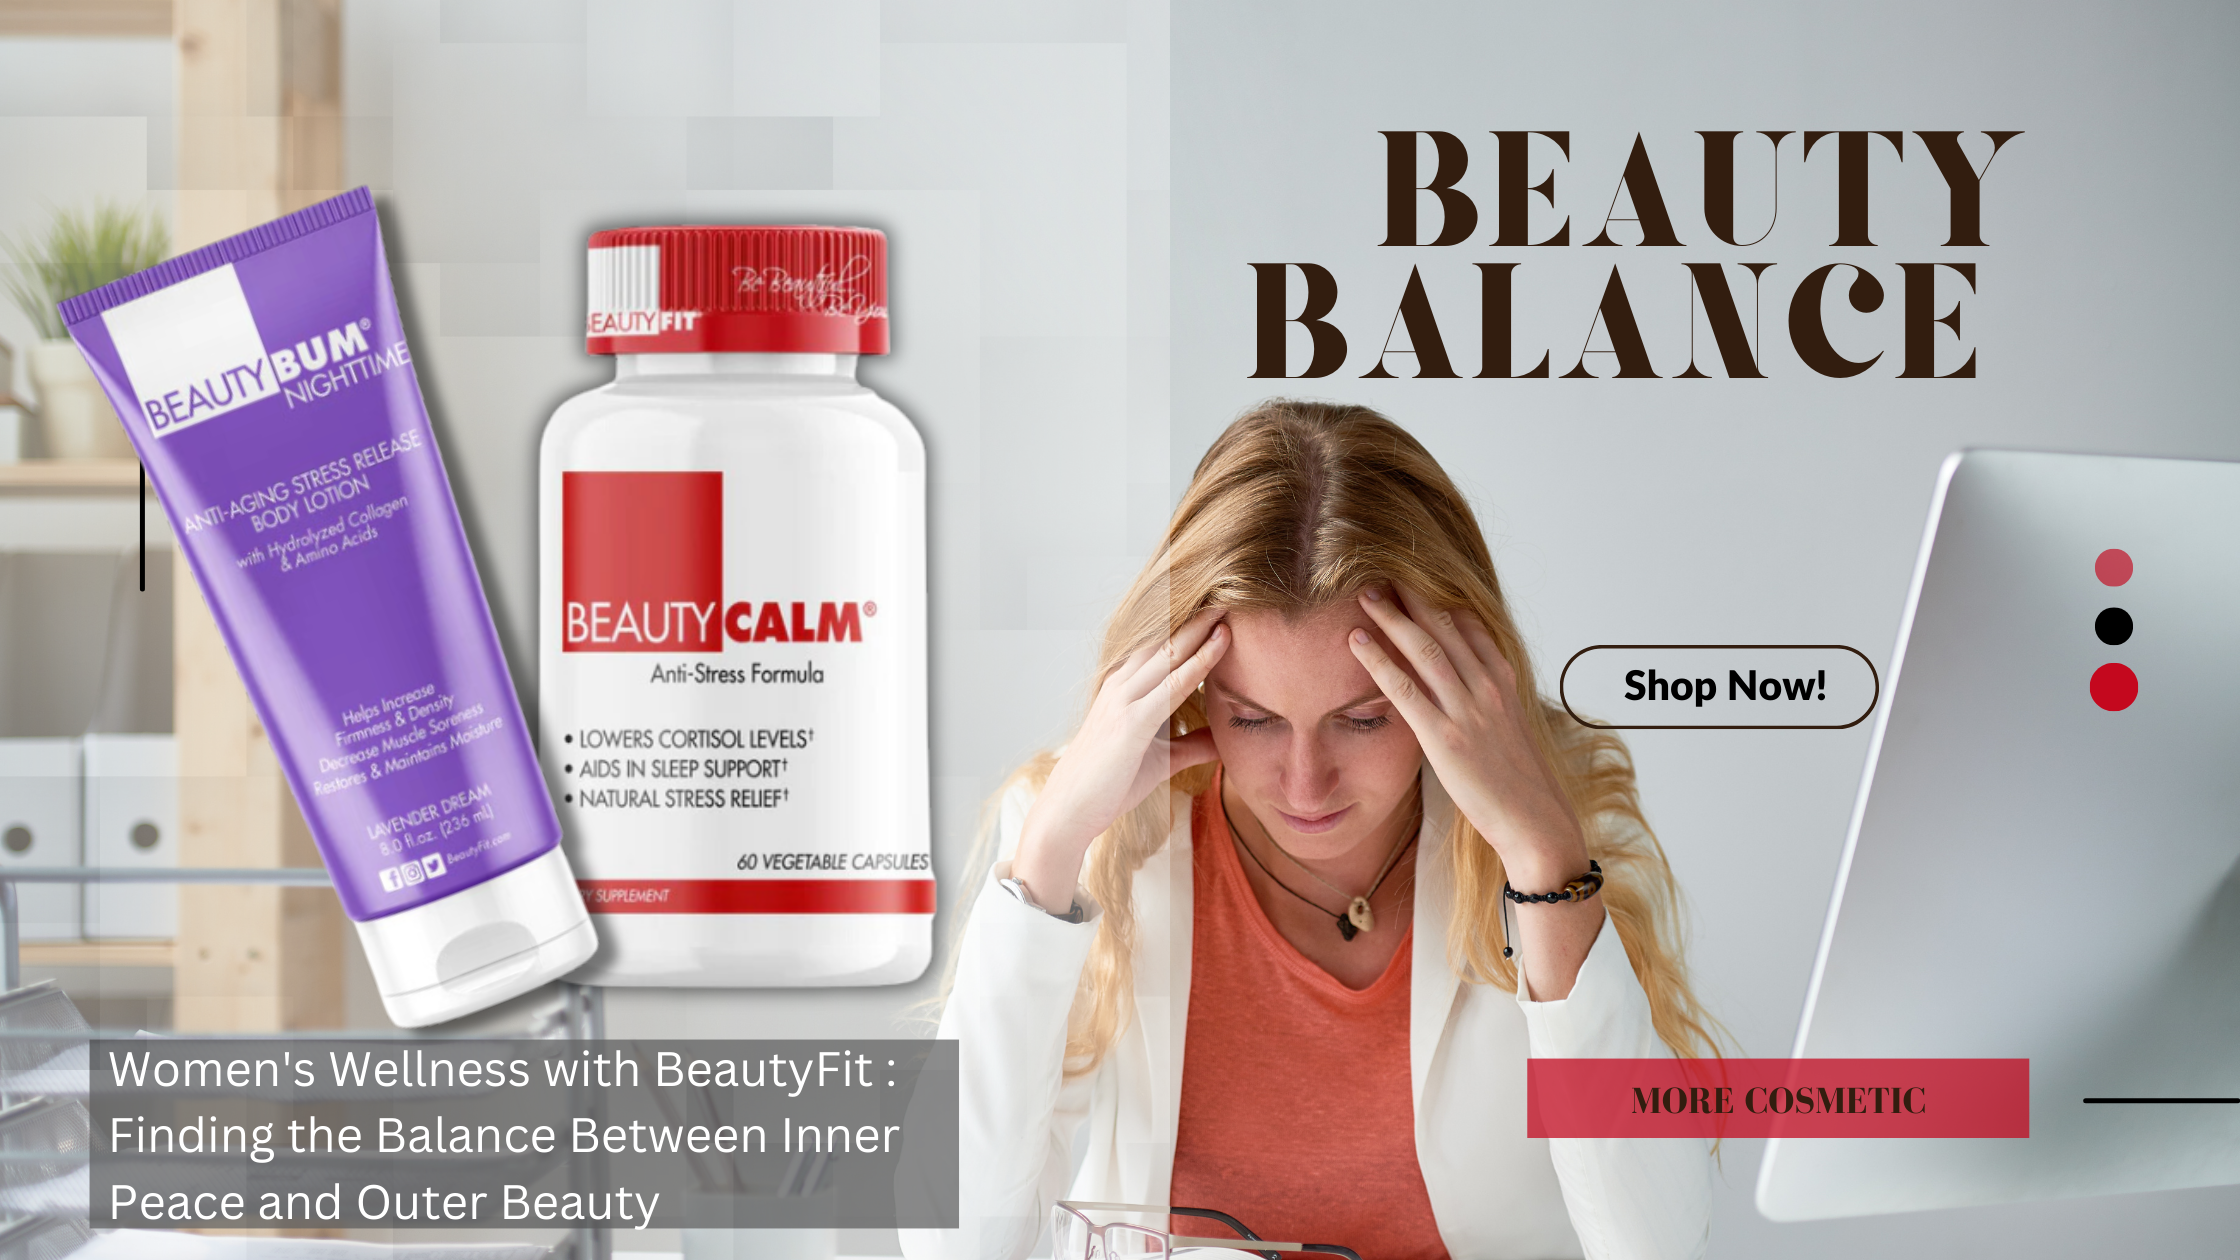 Women's Wellness with BeautyFit : Finding the Balance Between Inner Peace and Outer Beauty